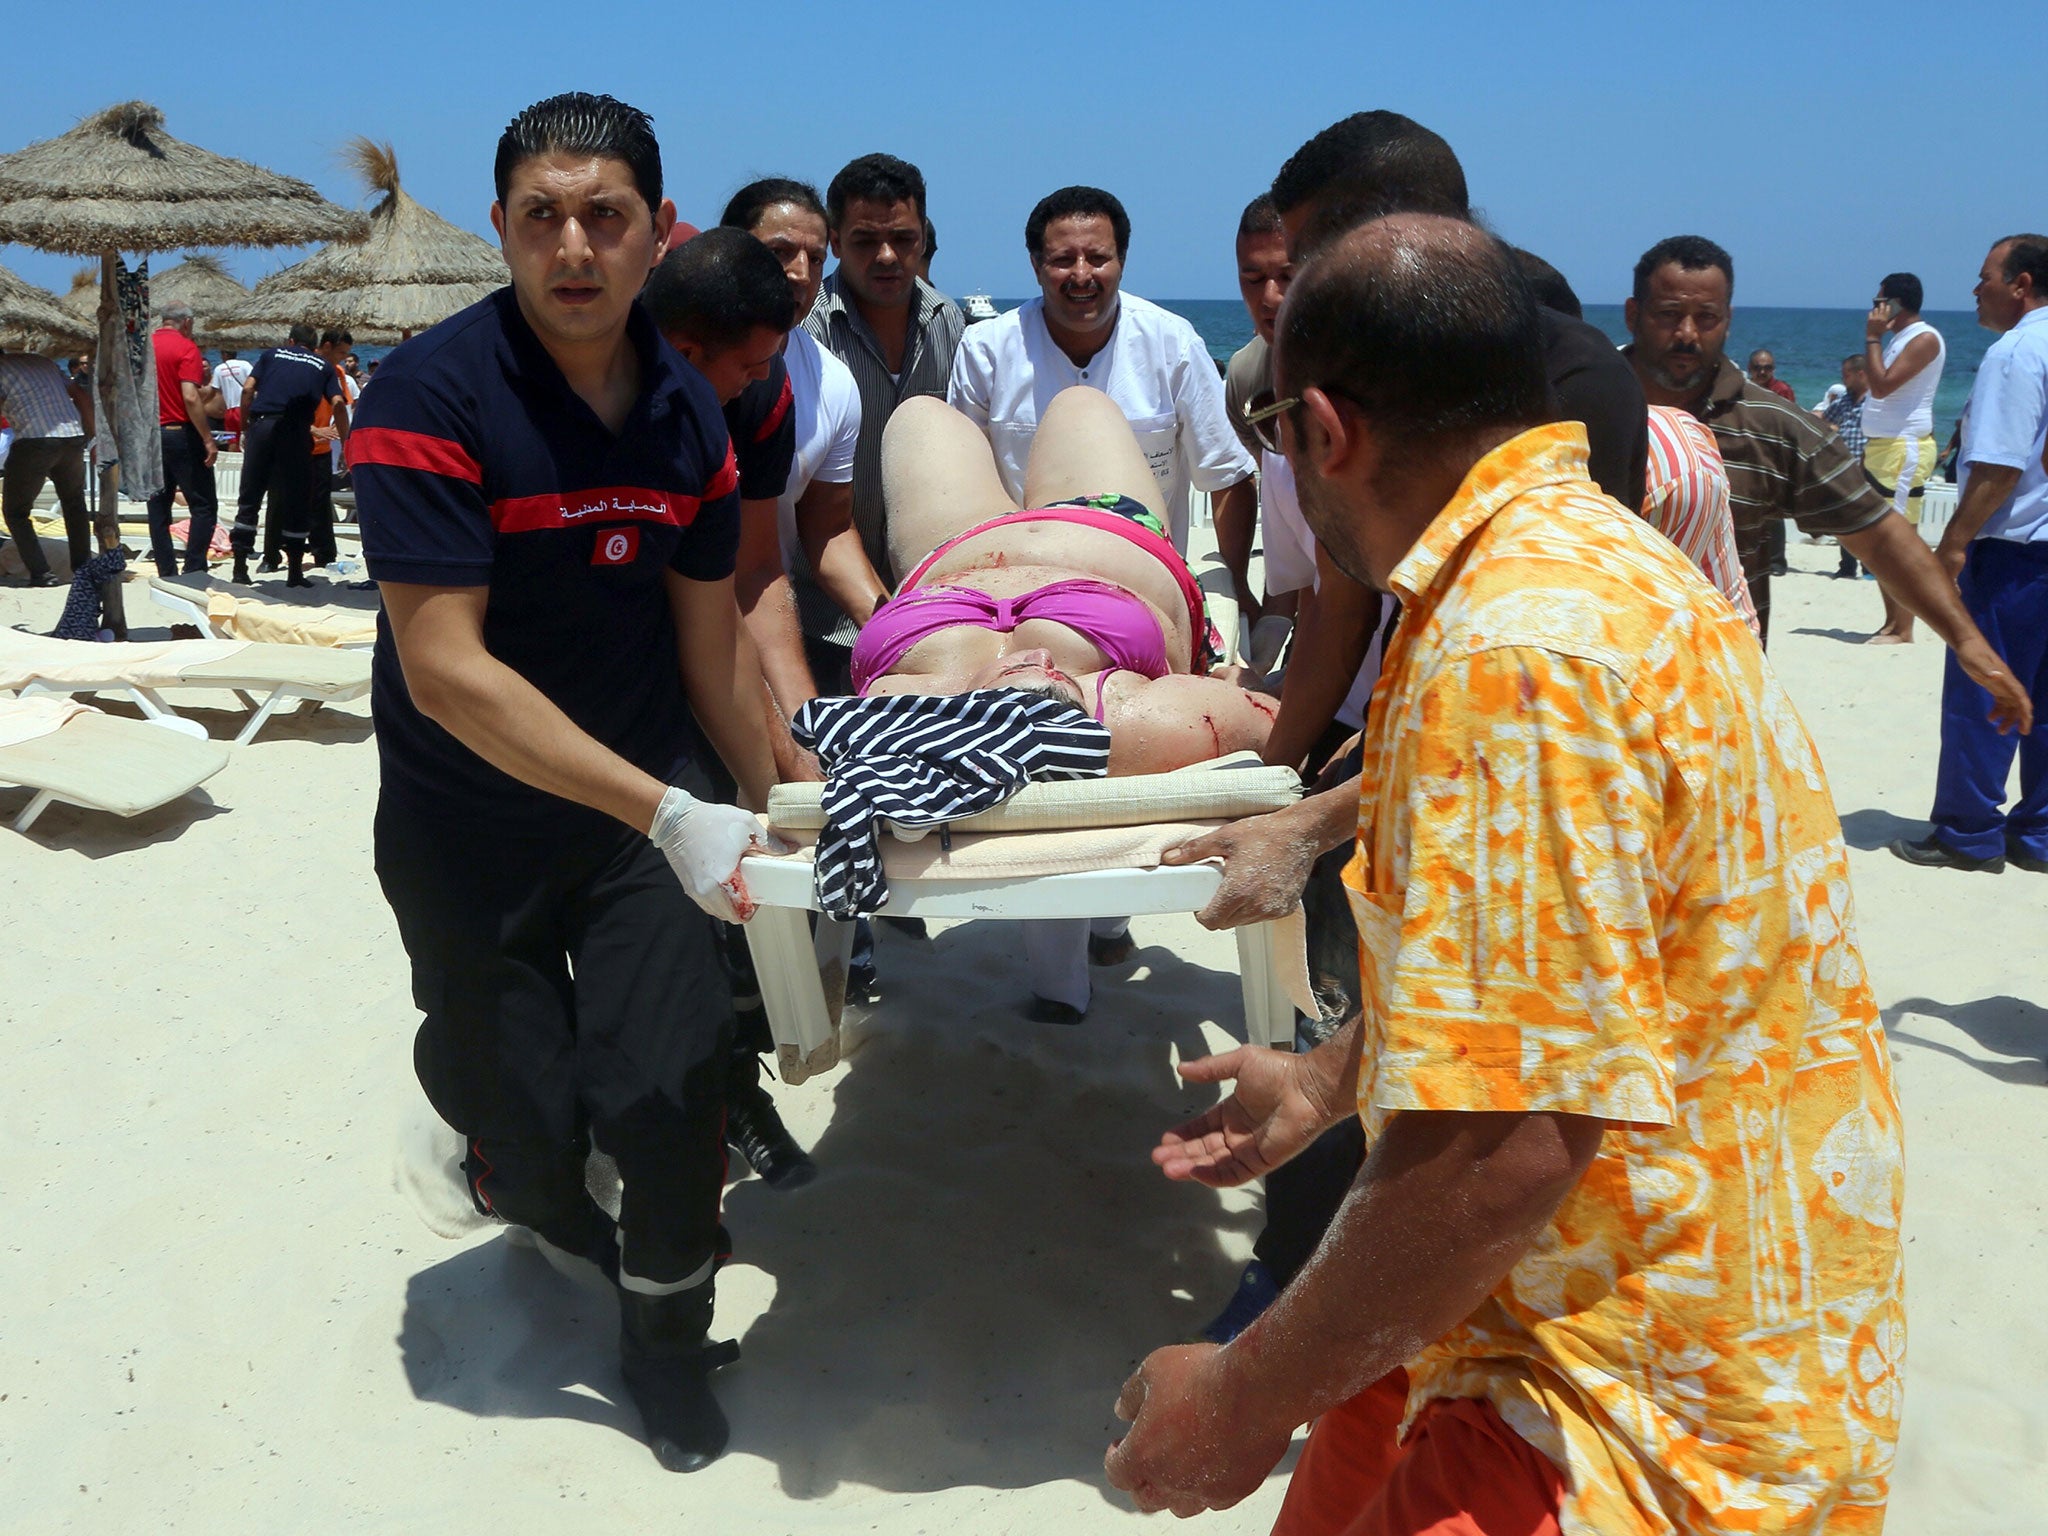 Tunisian medics carry a woman on a stretcher in the resort town of Sousse